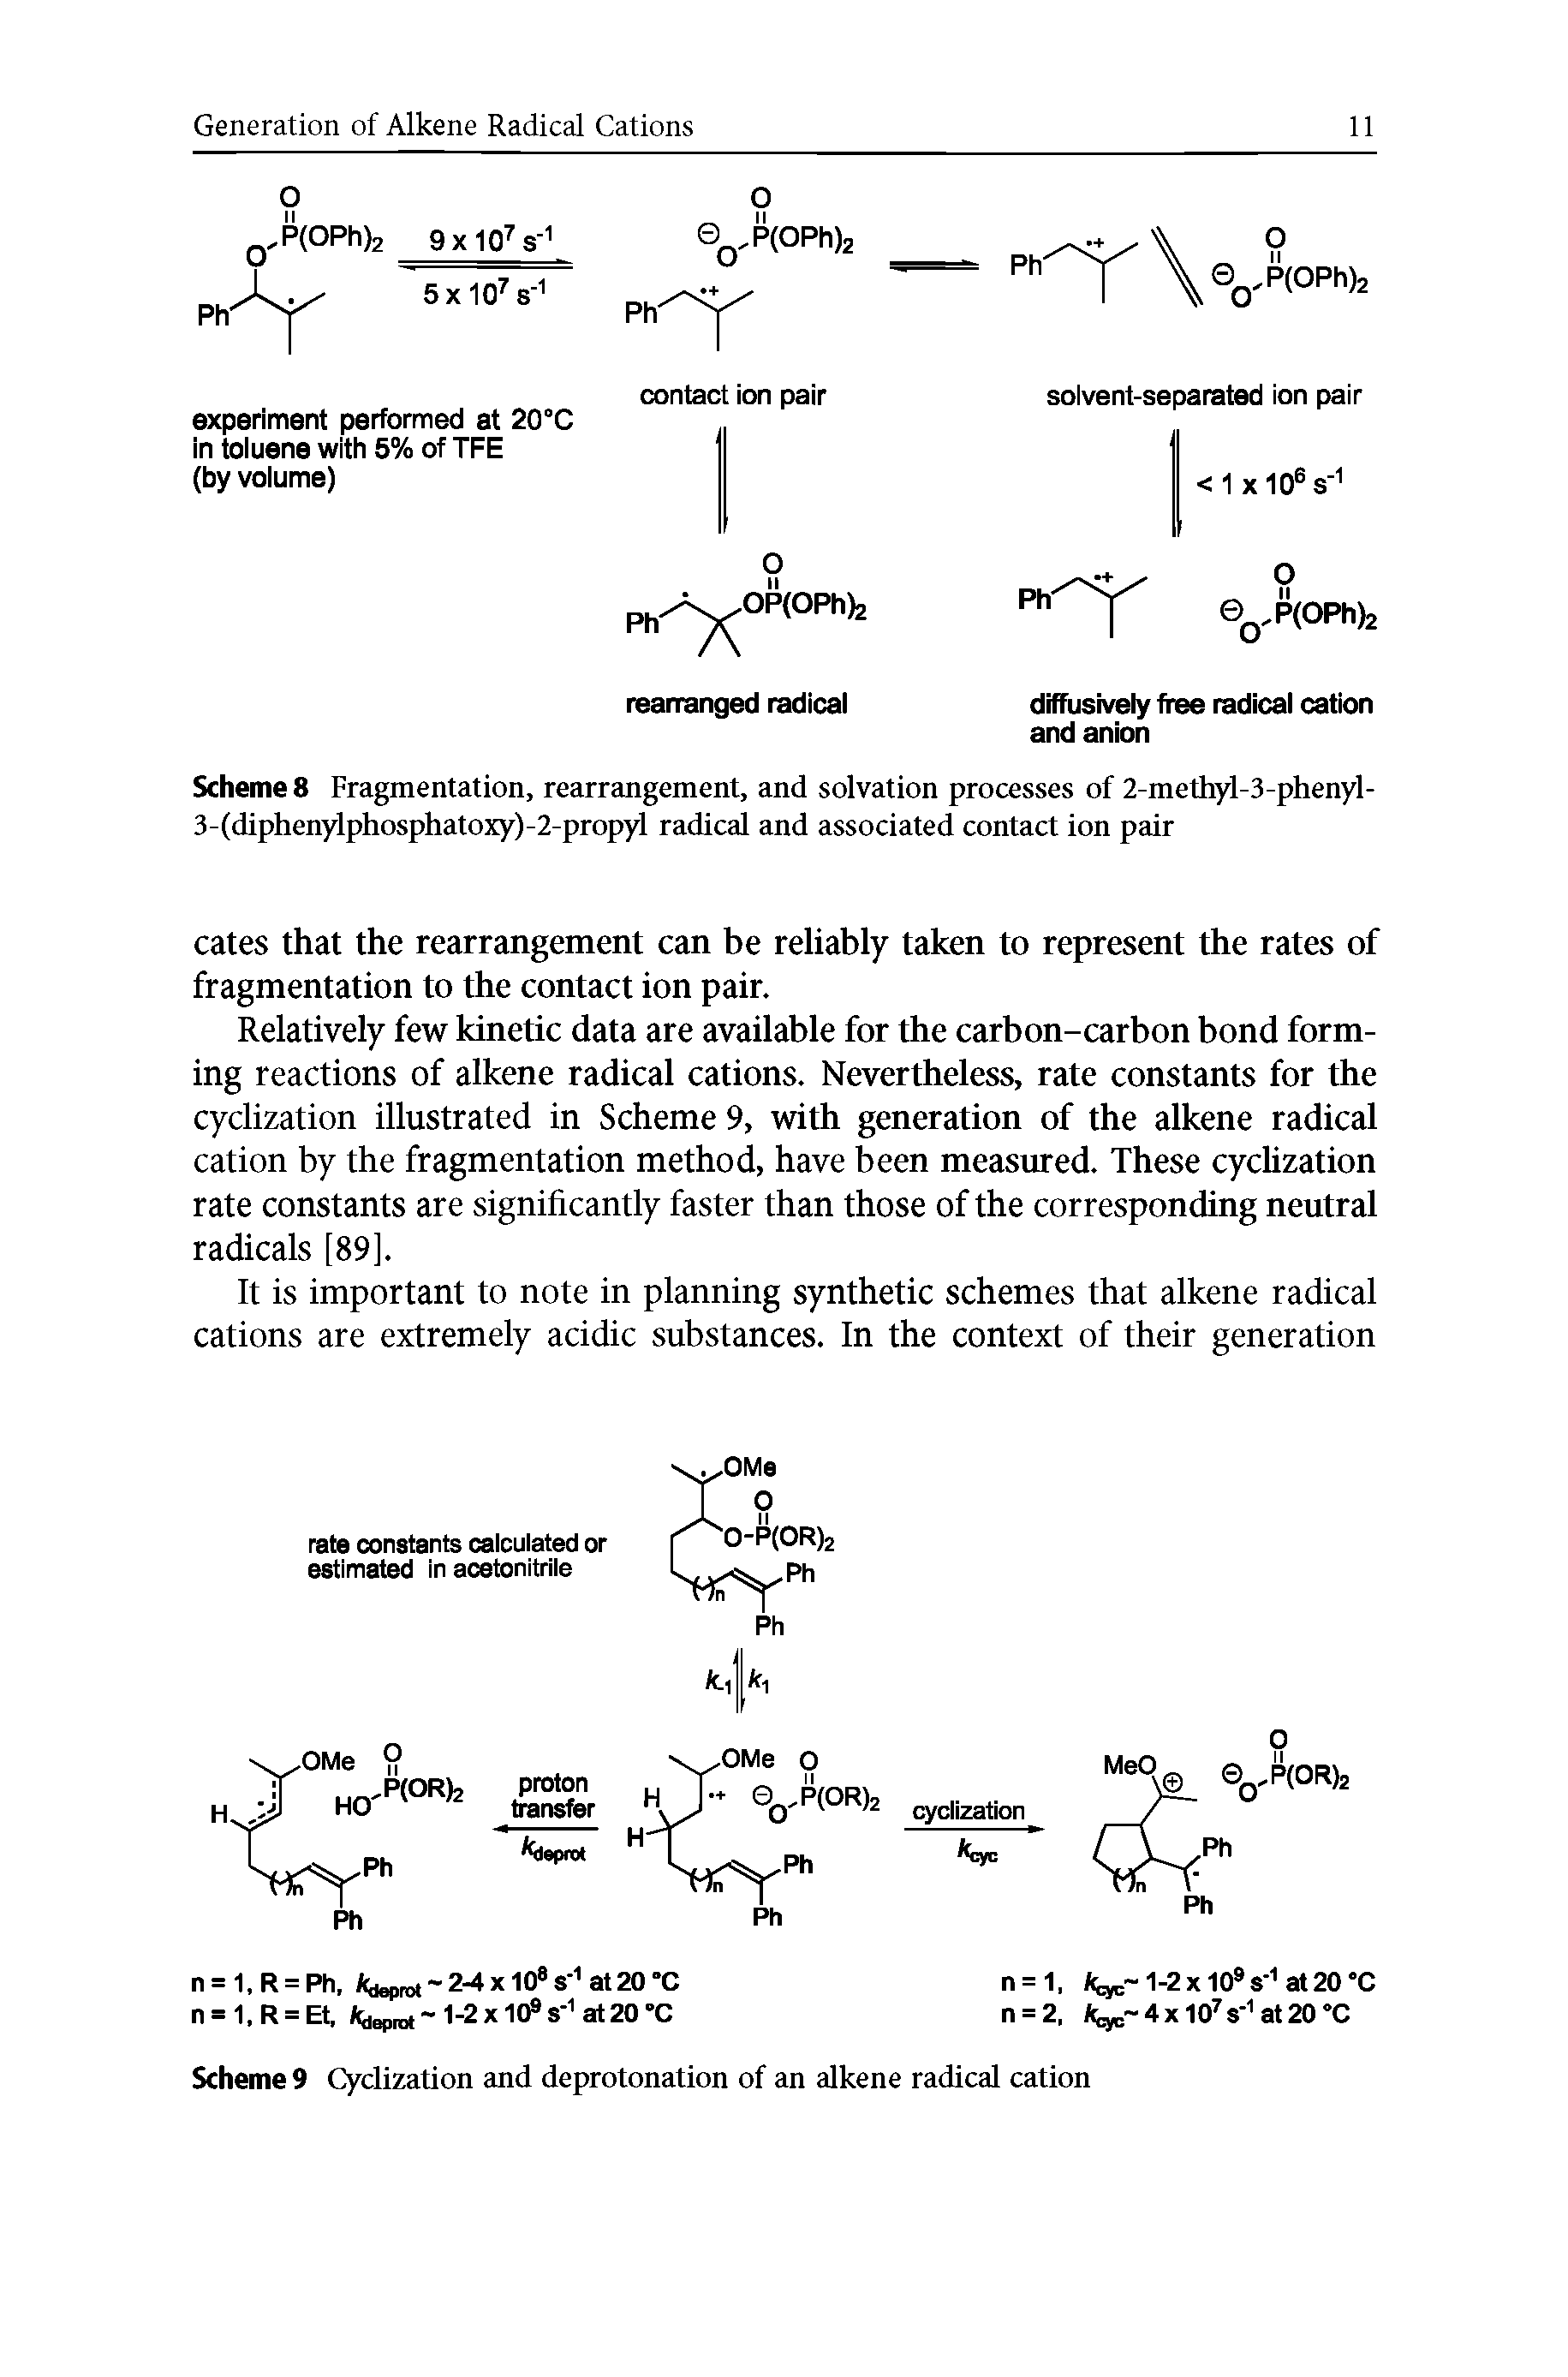 Scheme 9 Cyclization and deprotonation of an alkene radical cation...